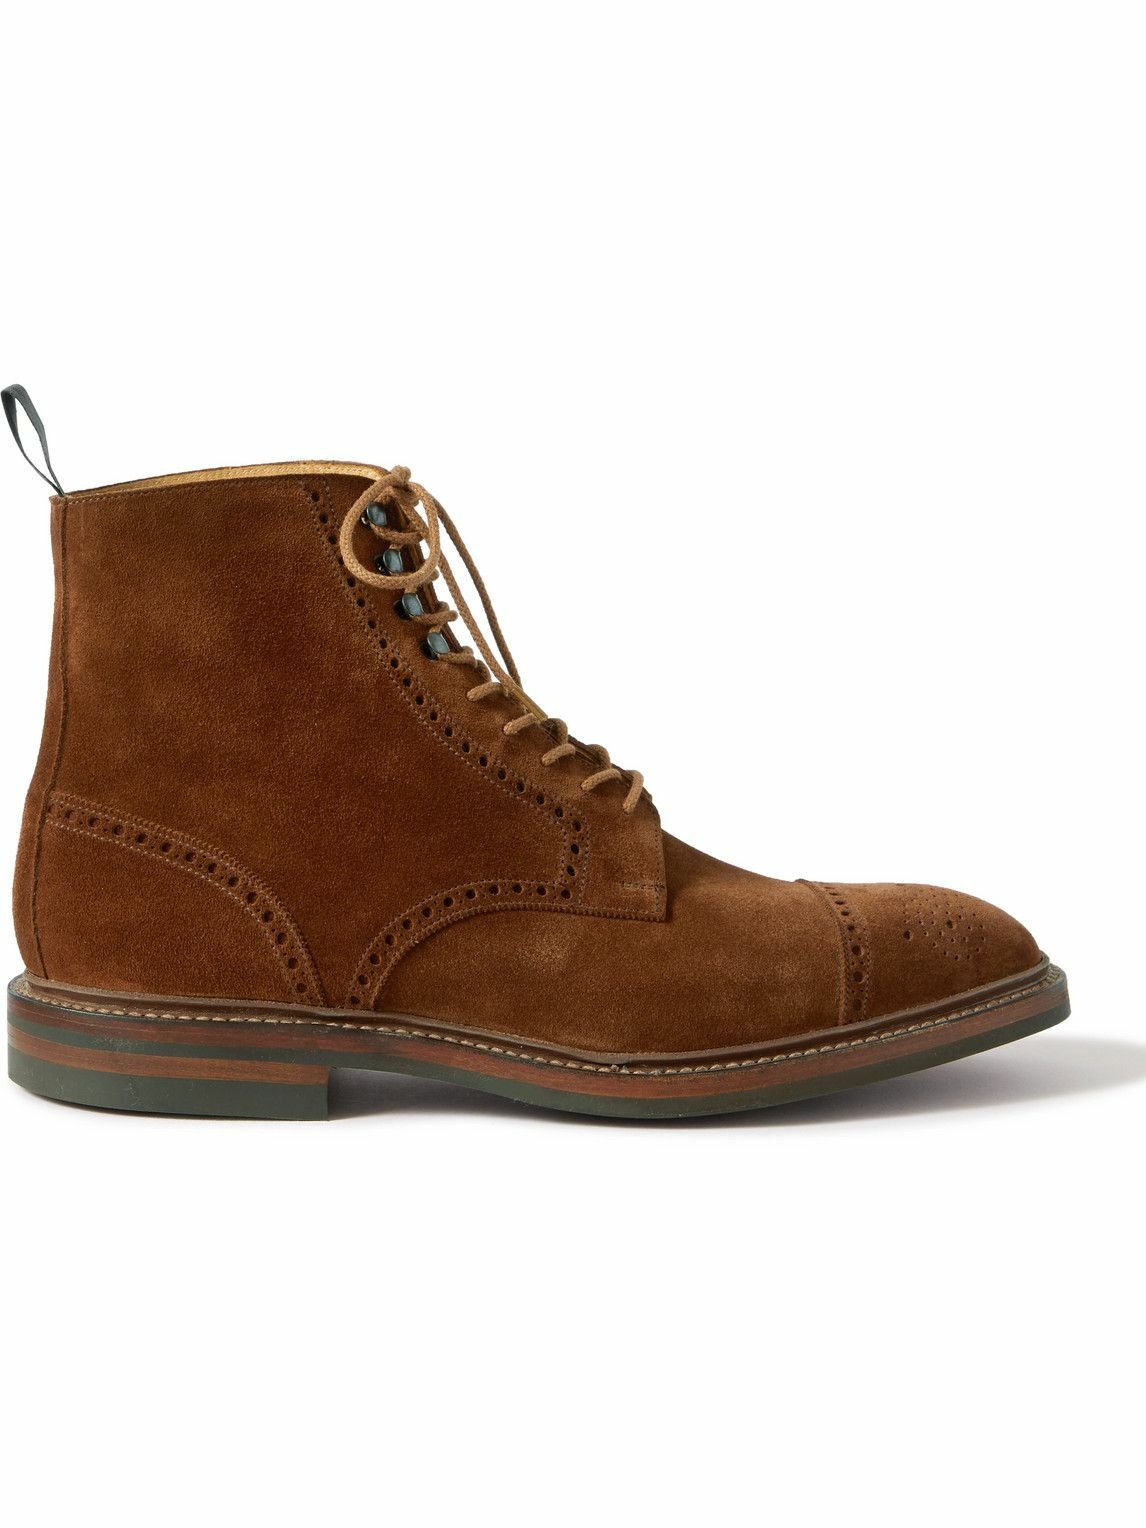 Photo: George Cleverley - Toby Suede Brogue Boots - Brown